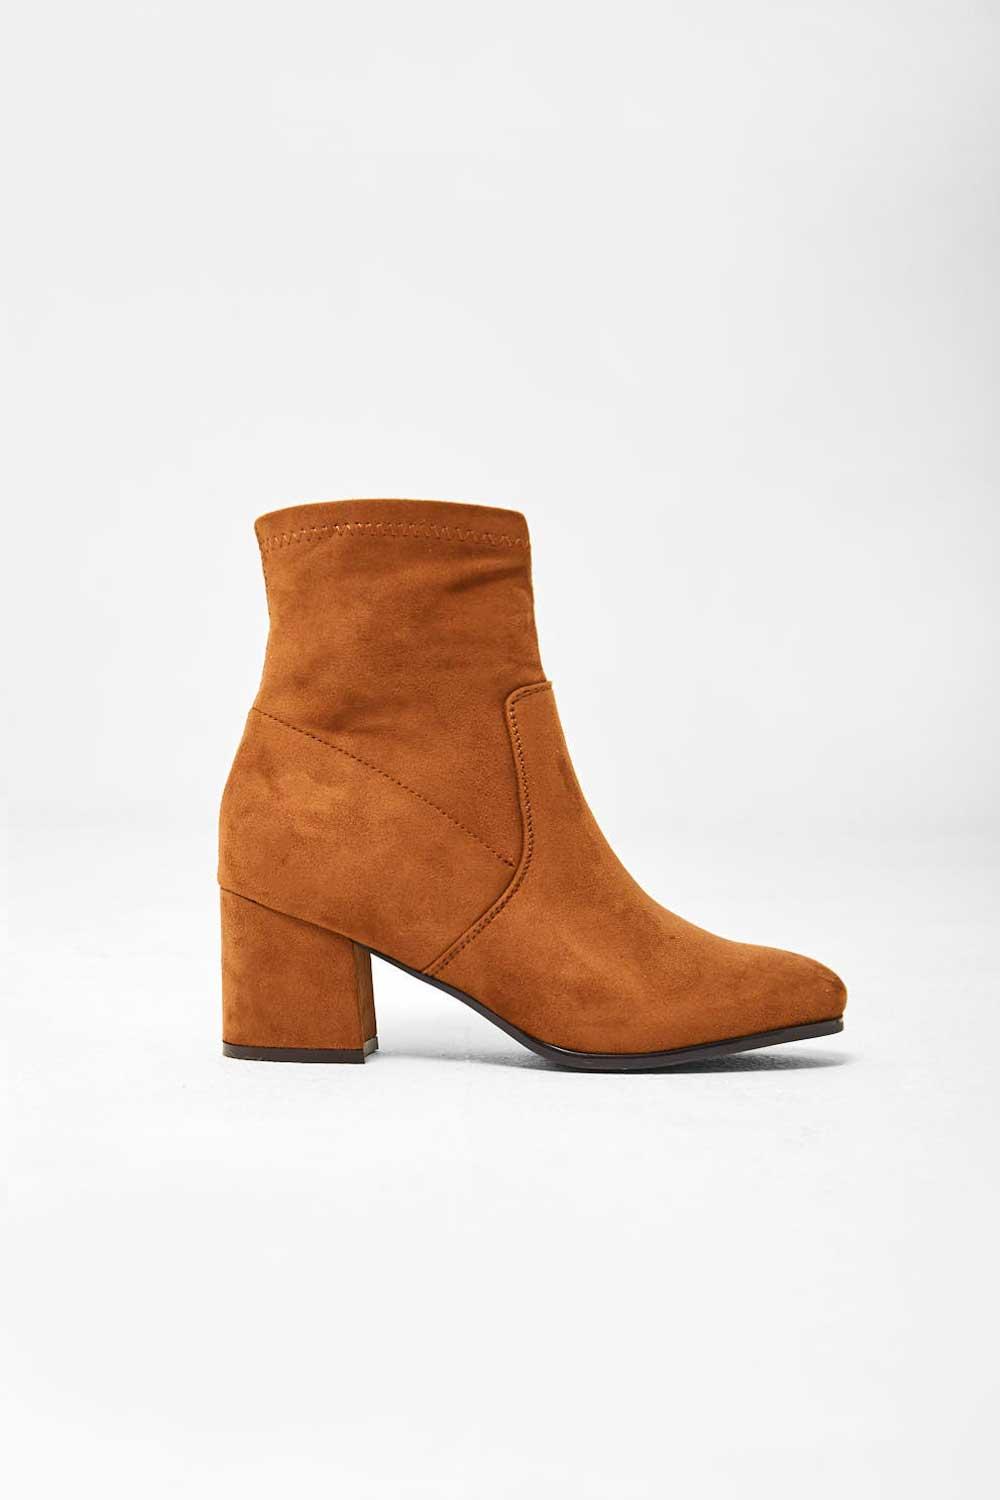 suede pixie boots